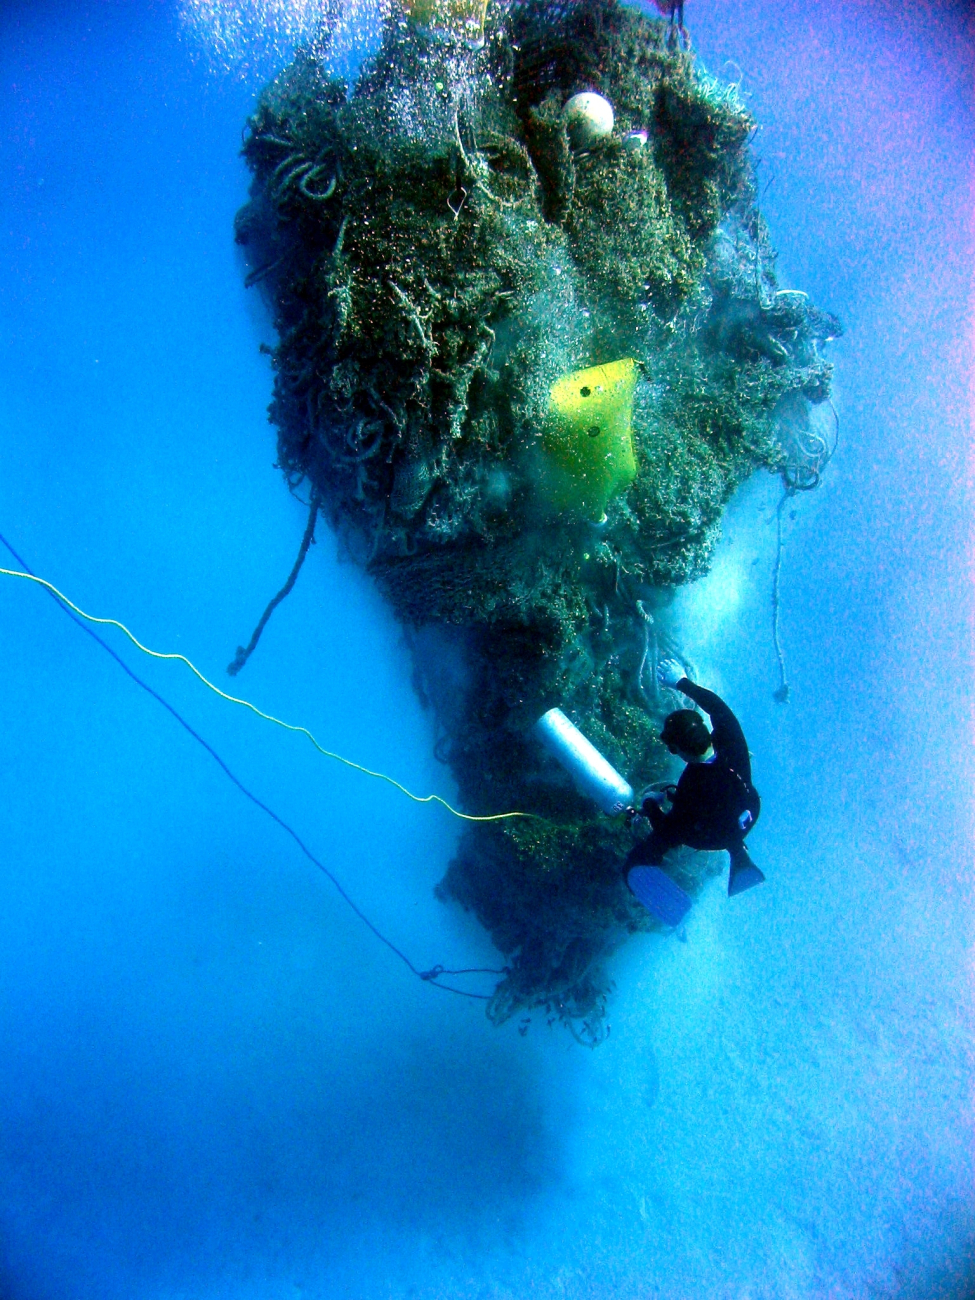 Major amounts of derelict nets taxed the ability of divers and equipment tobring to the surface